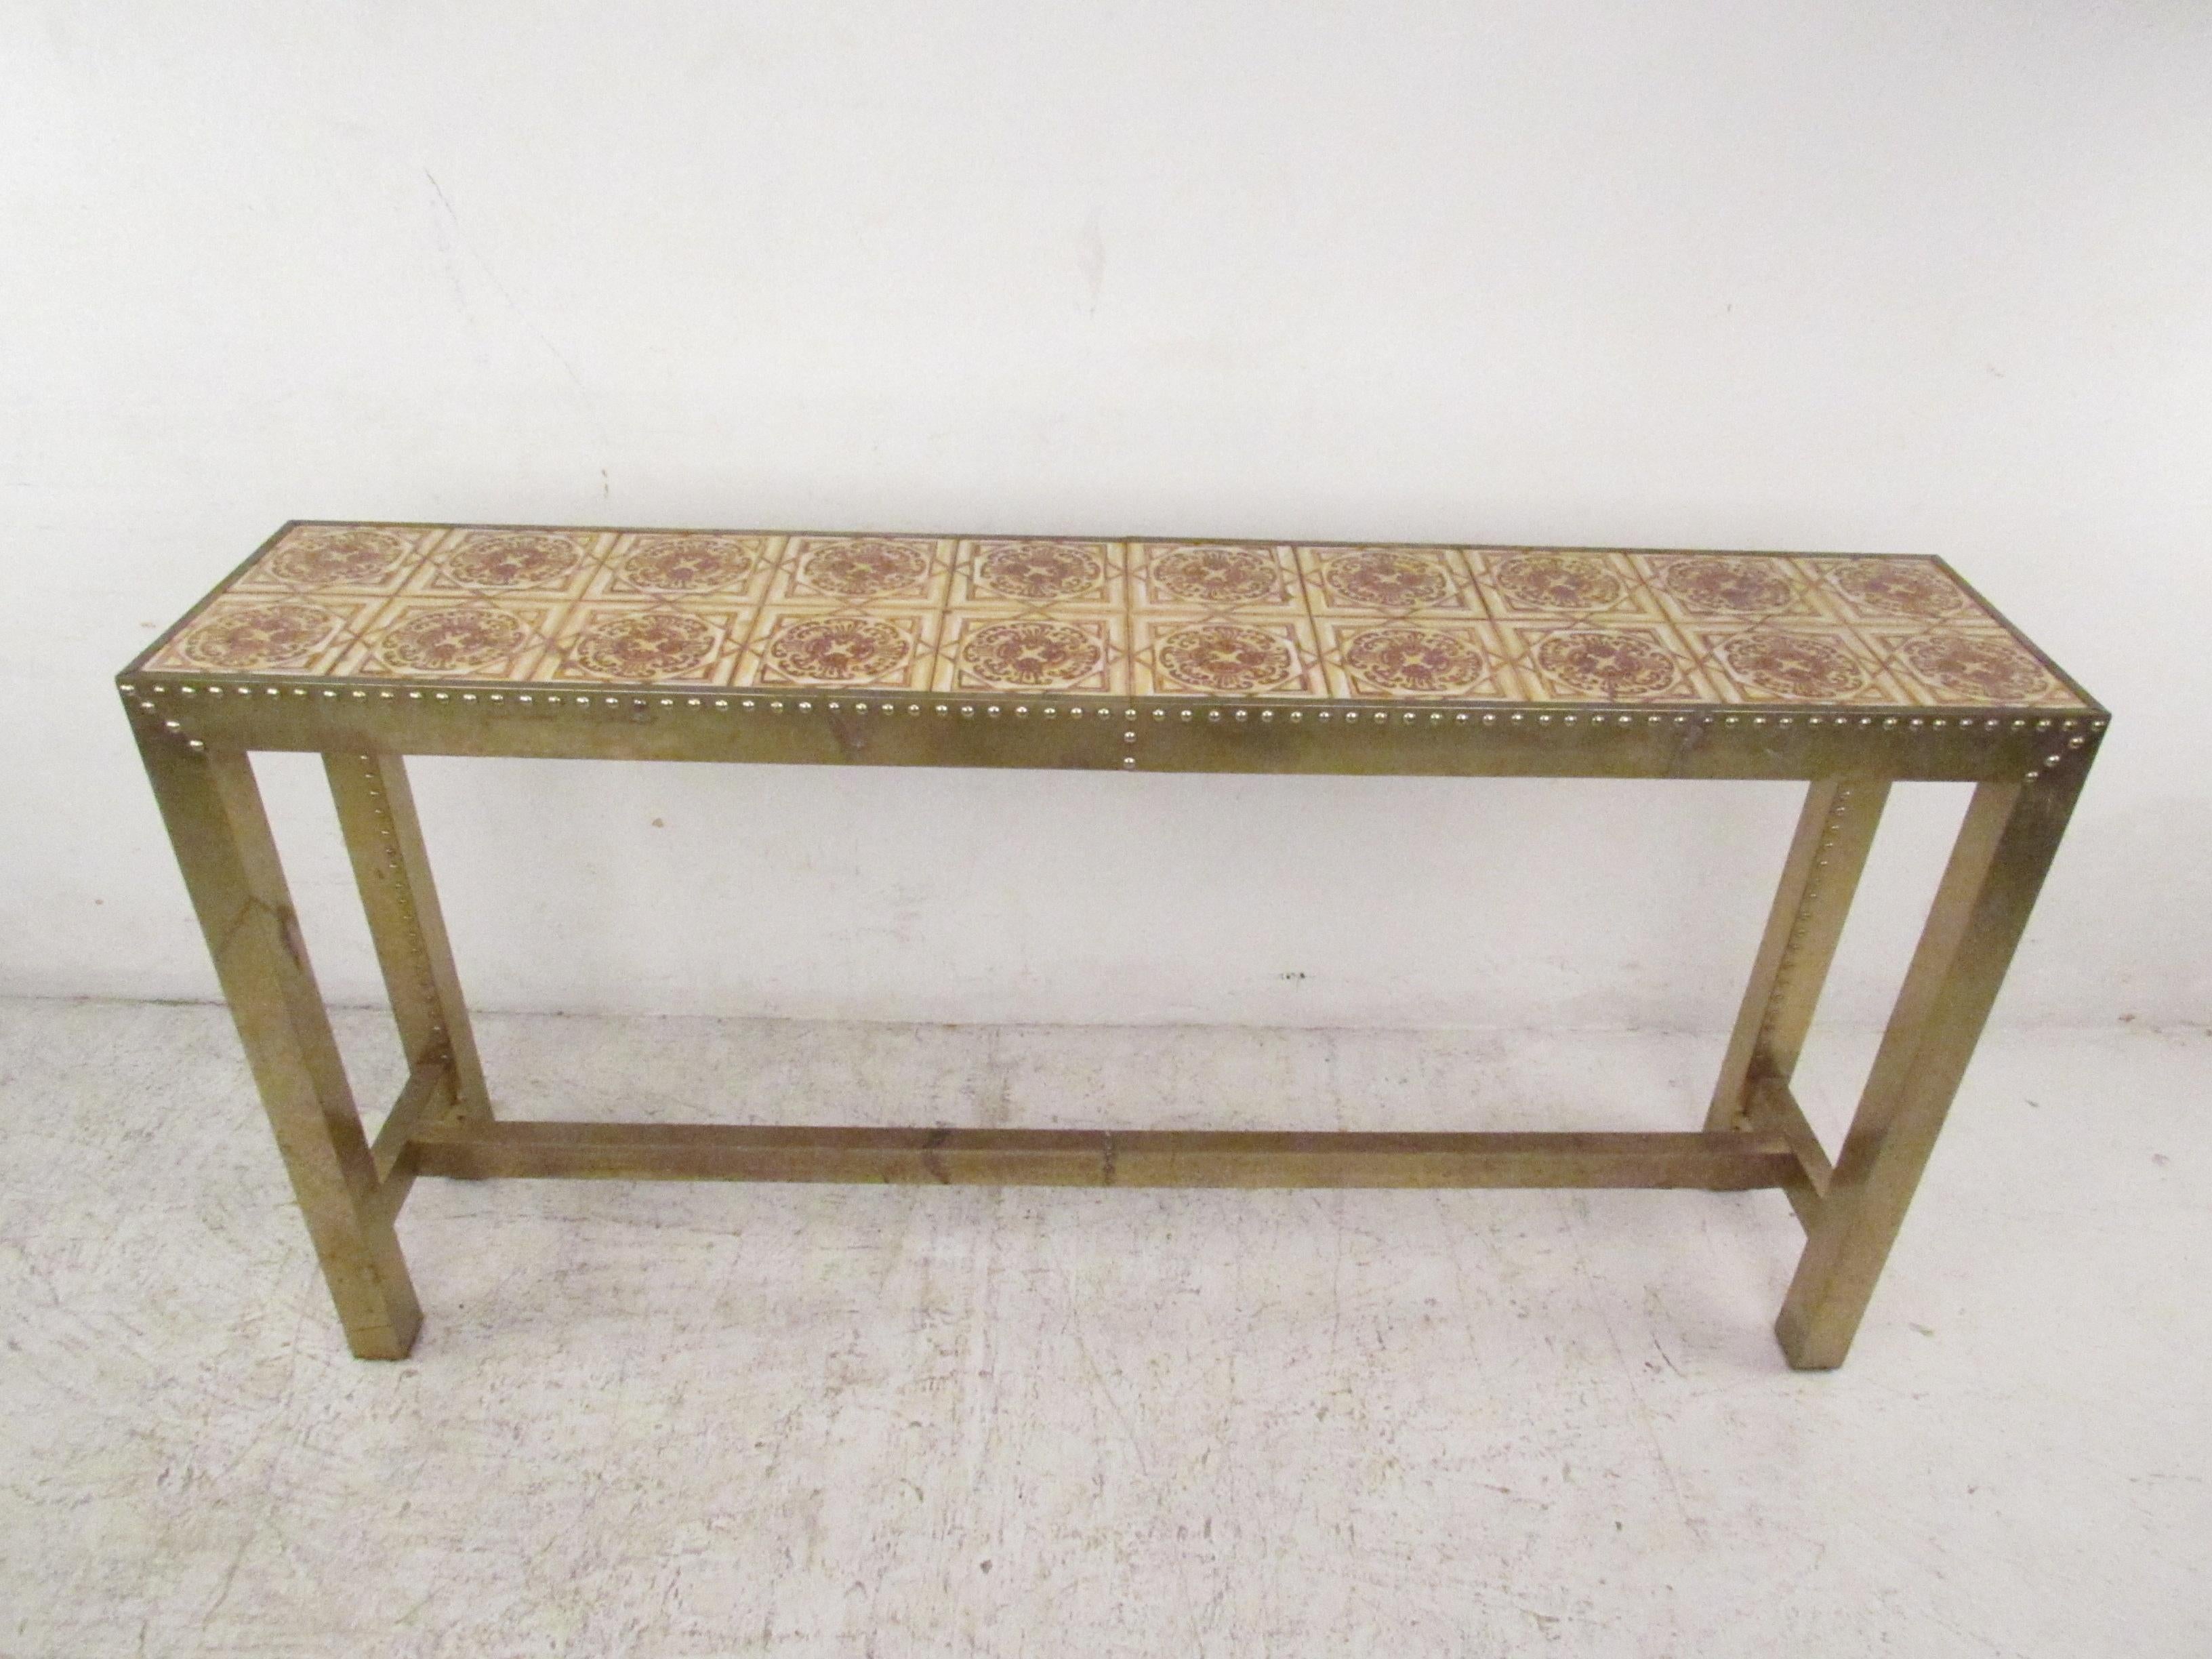 This beautiful vintage modern console table boasts a unique top with decorative tiles and a brass studded frame. An unusual piece that looks great behind the sofa, in the entry way, or in the hallway. Please confirm item location (NY or NJ).